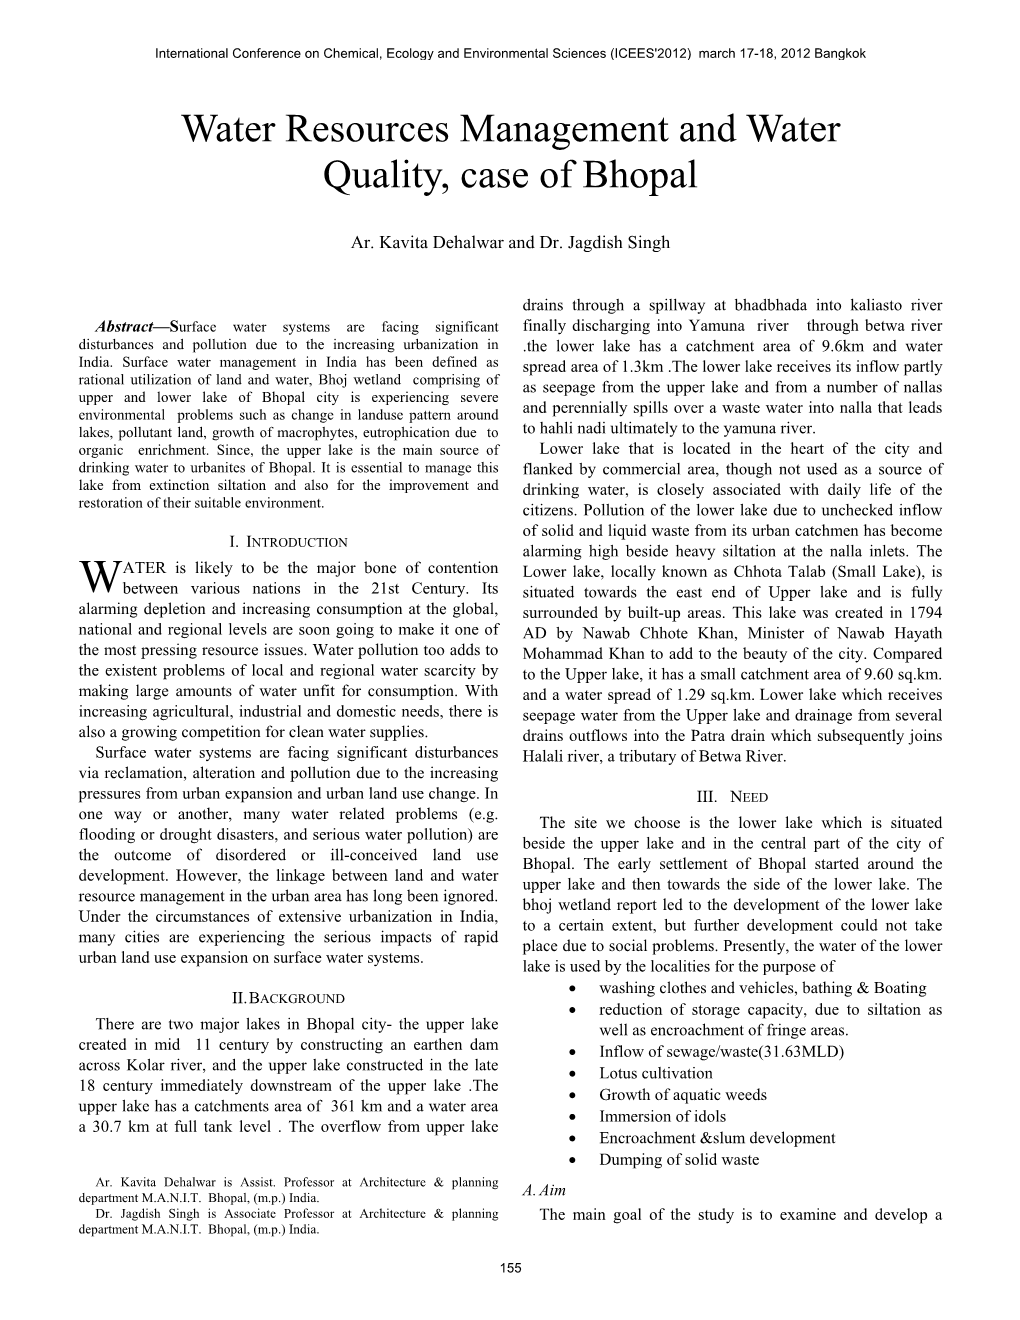 Water Resources Management and Water Quality, Case of Bhopal